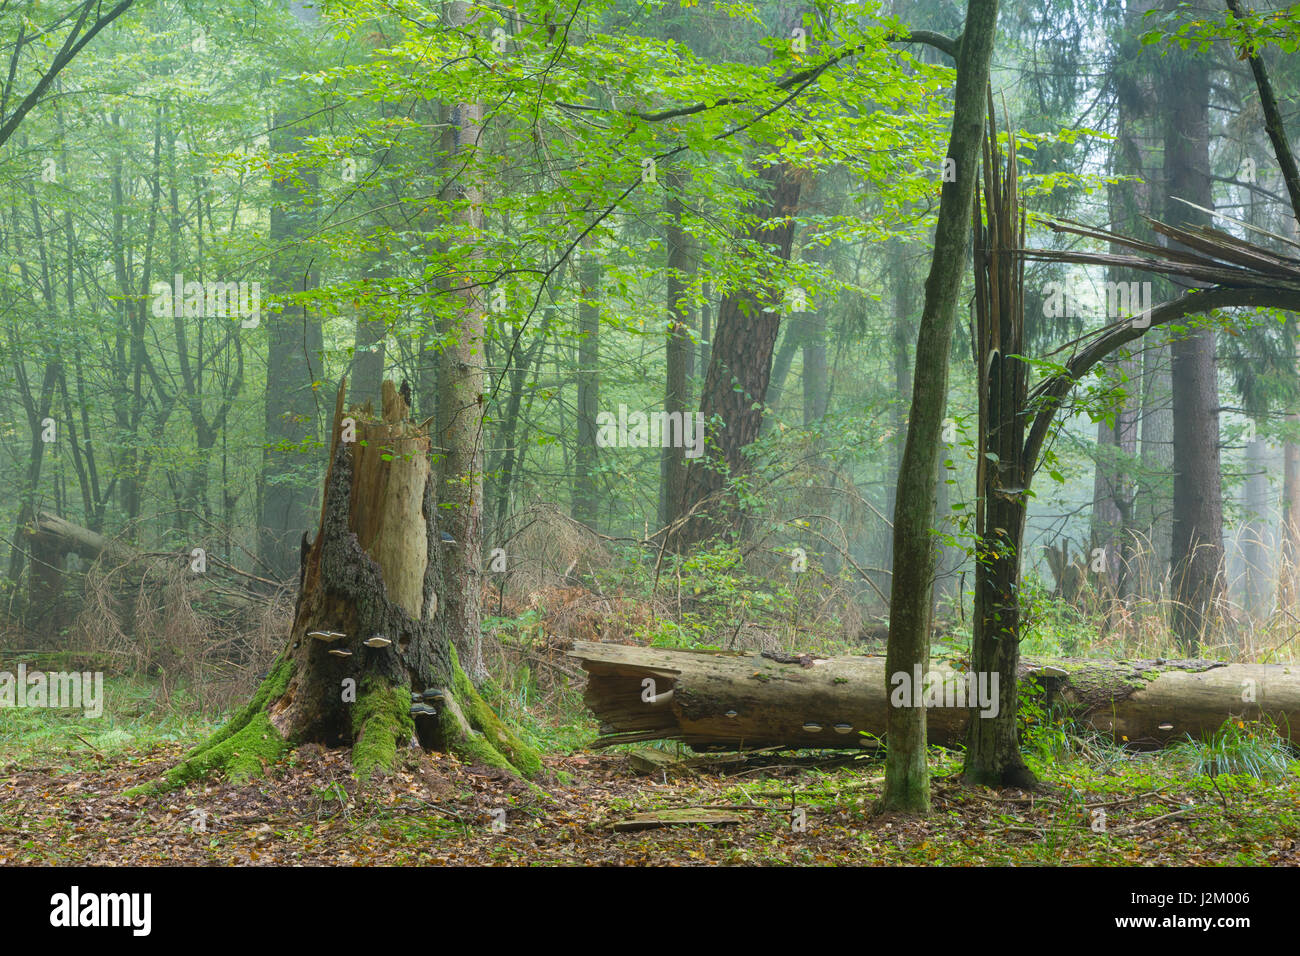 Autumnal deciduous stand with dead tree stump partly declined in foreground with some polypore fungi, Bialowieza Forest,Poland,Europe Stock Photo